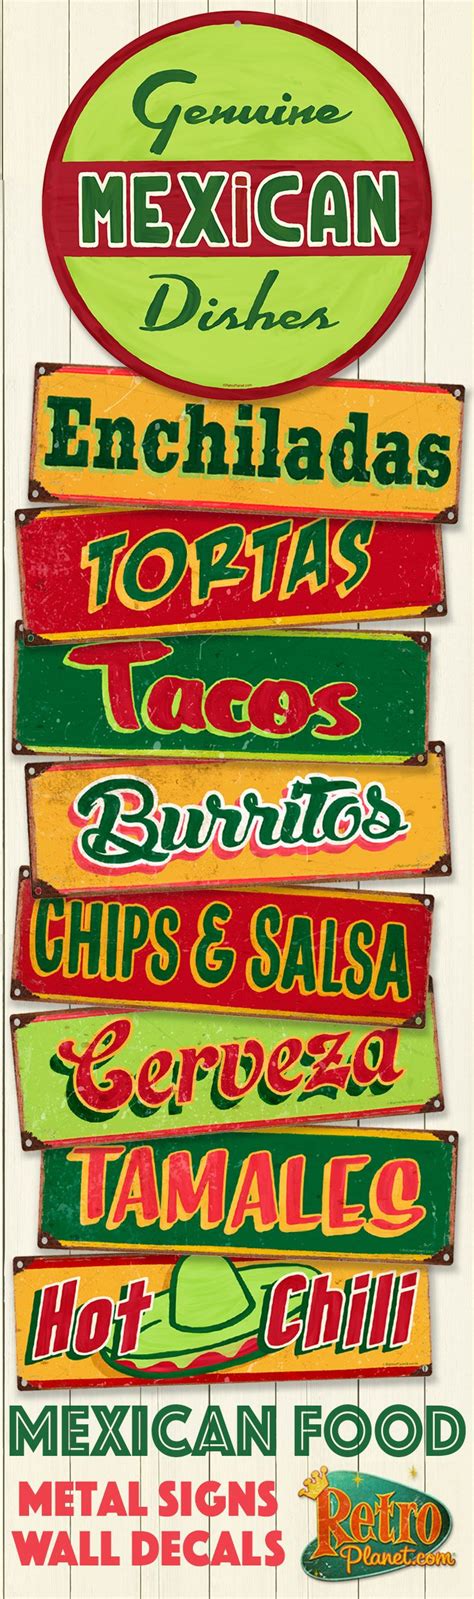 Mexican Restaurant Kitchen Signs Wall Decals And More Some Of Our Sign